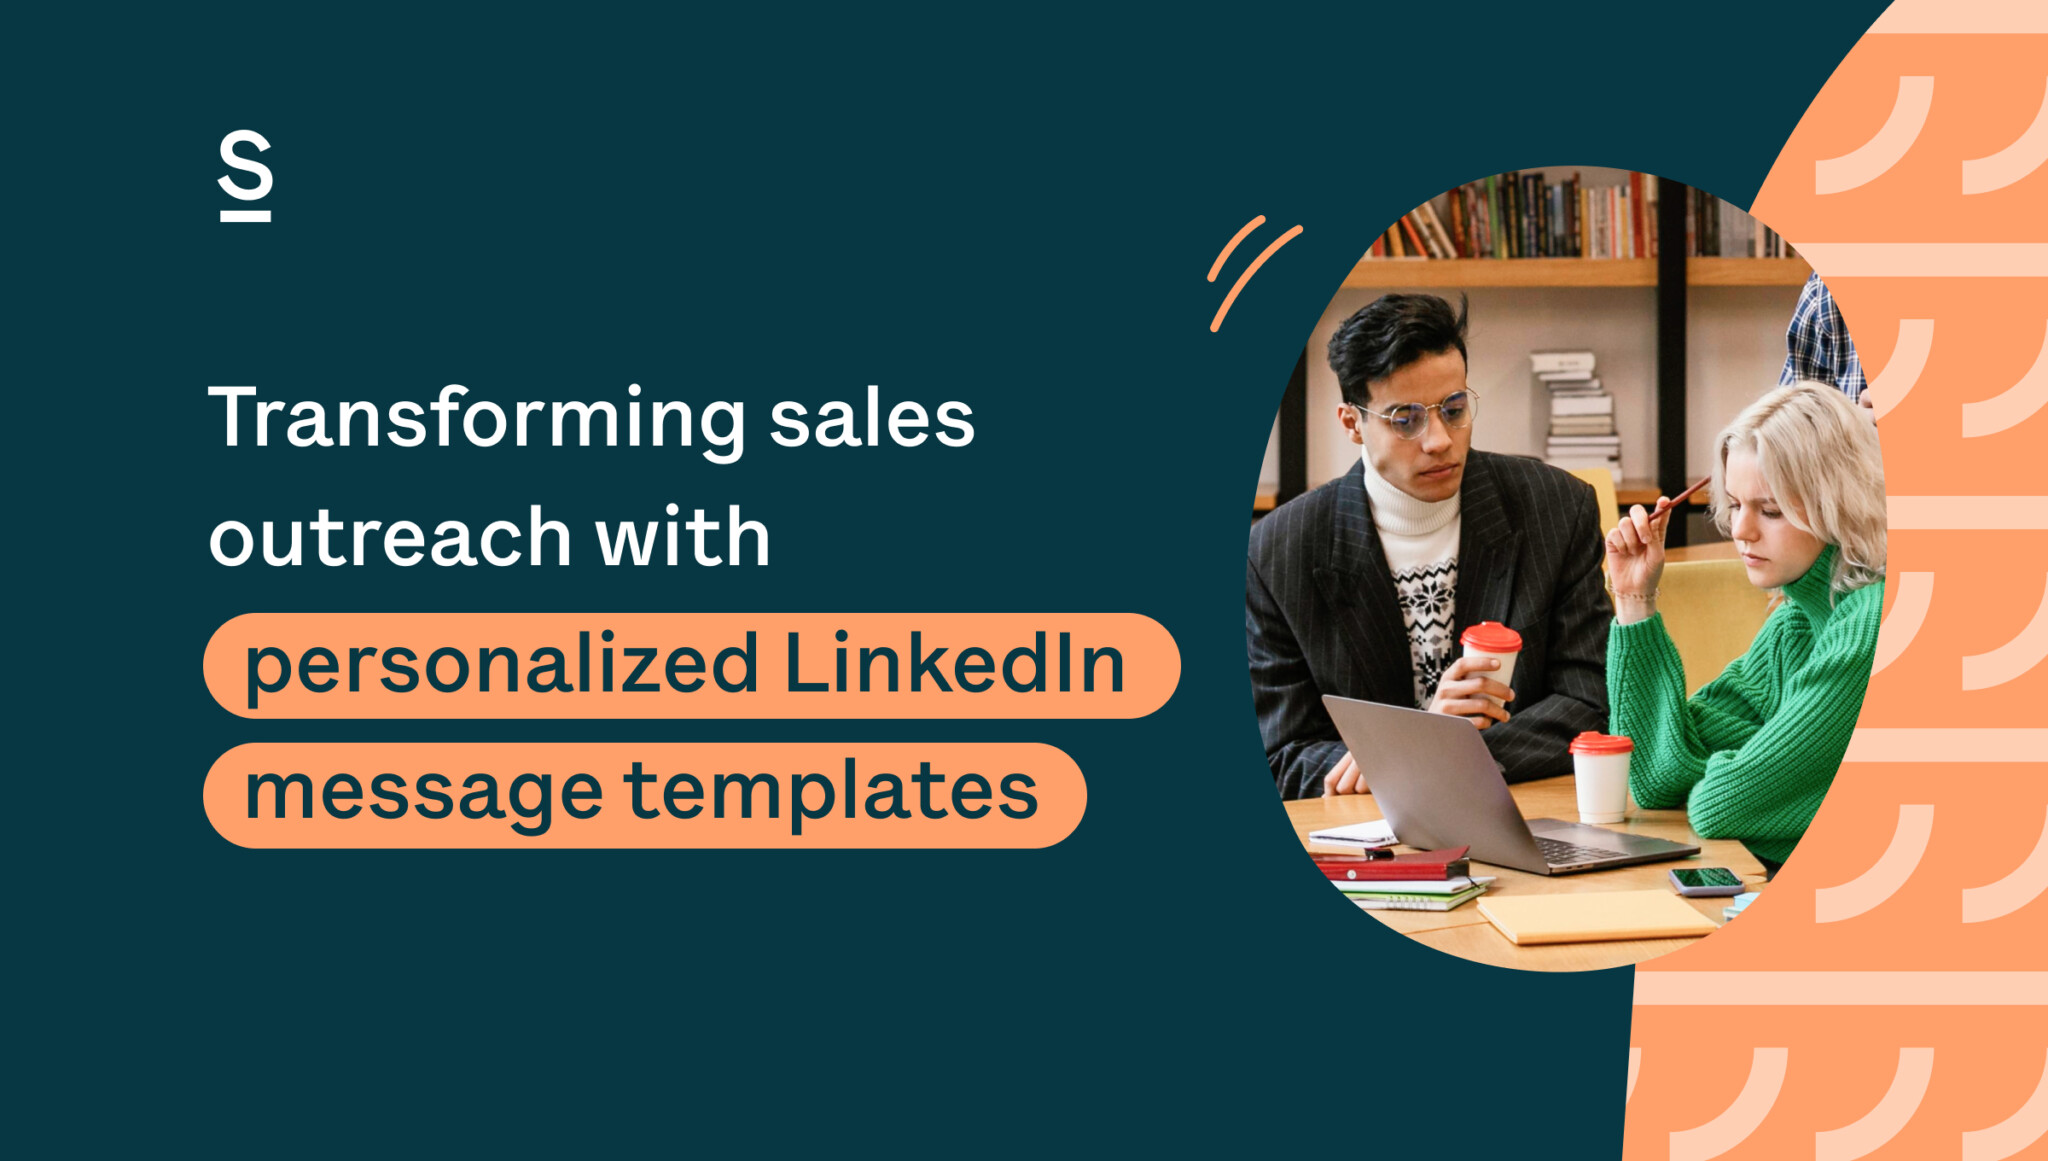 Grow sales with personalized LinkedIn Messaging Templates